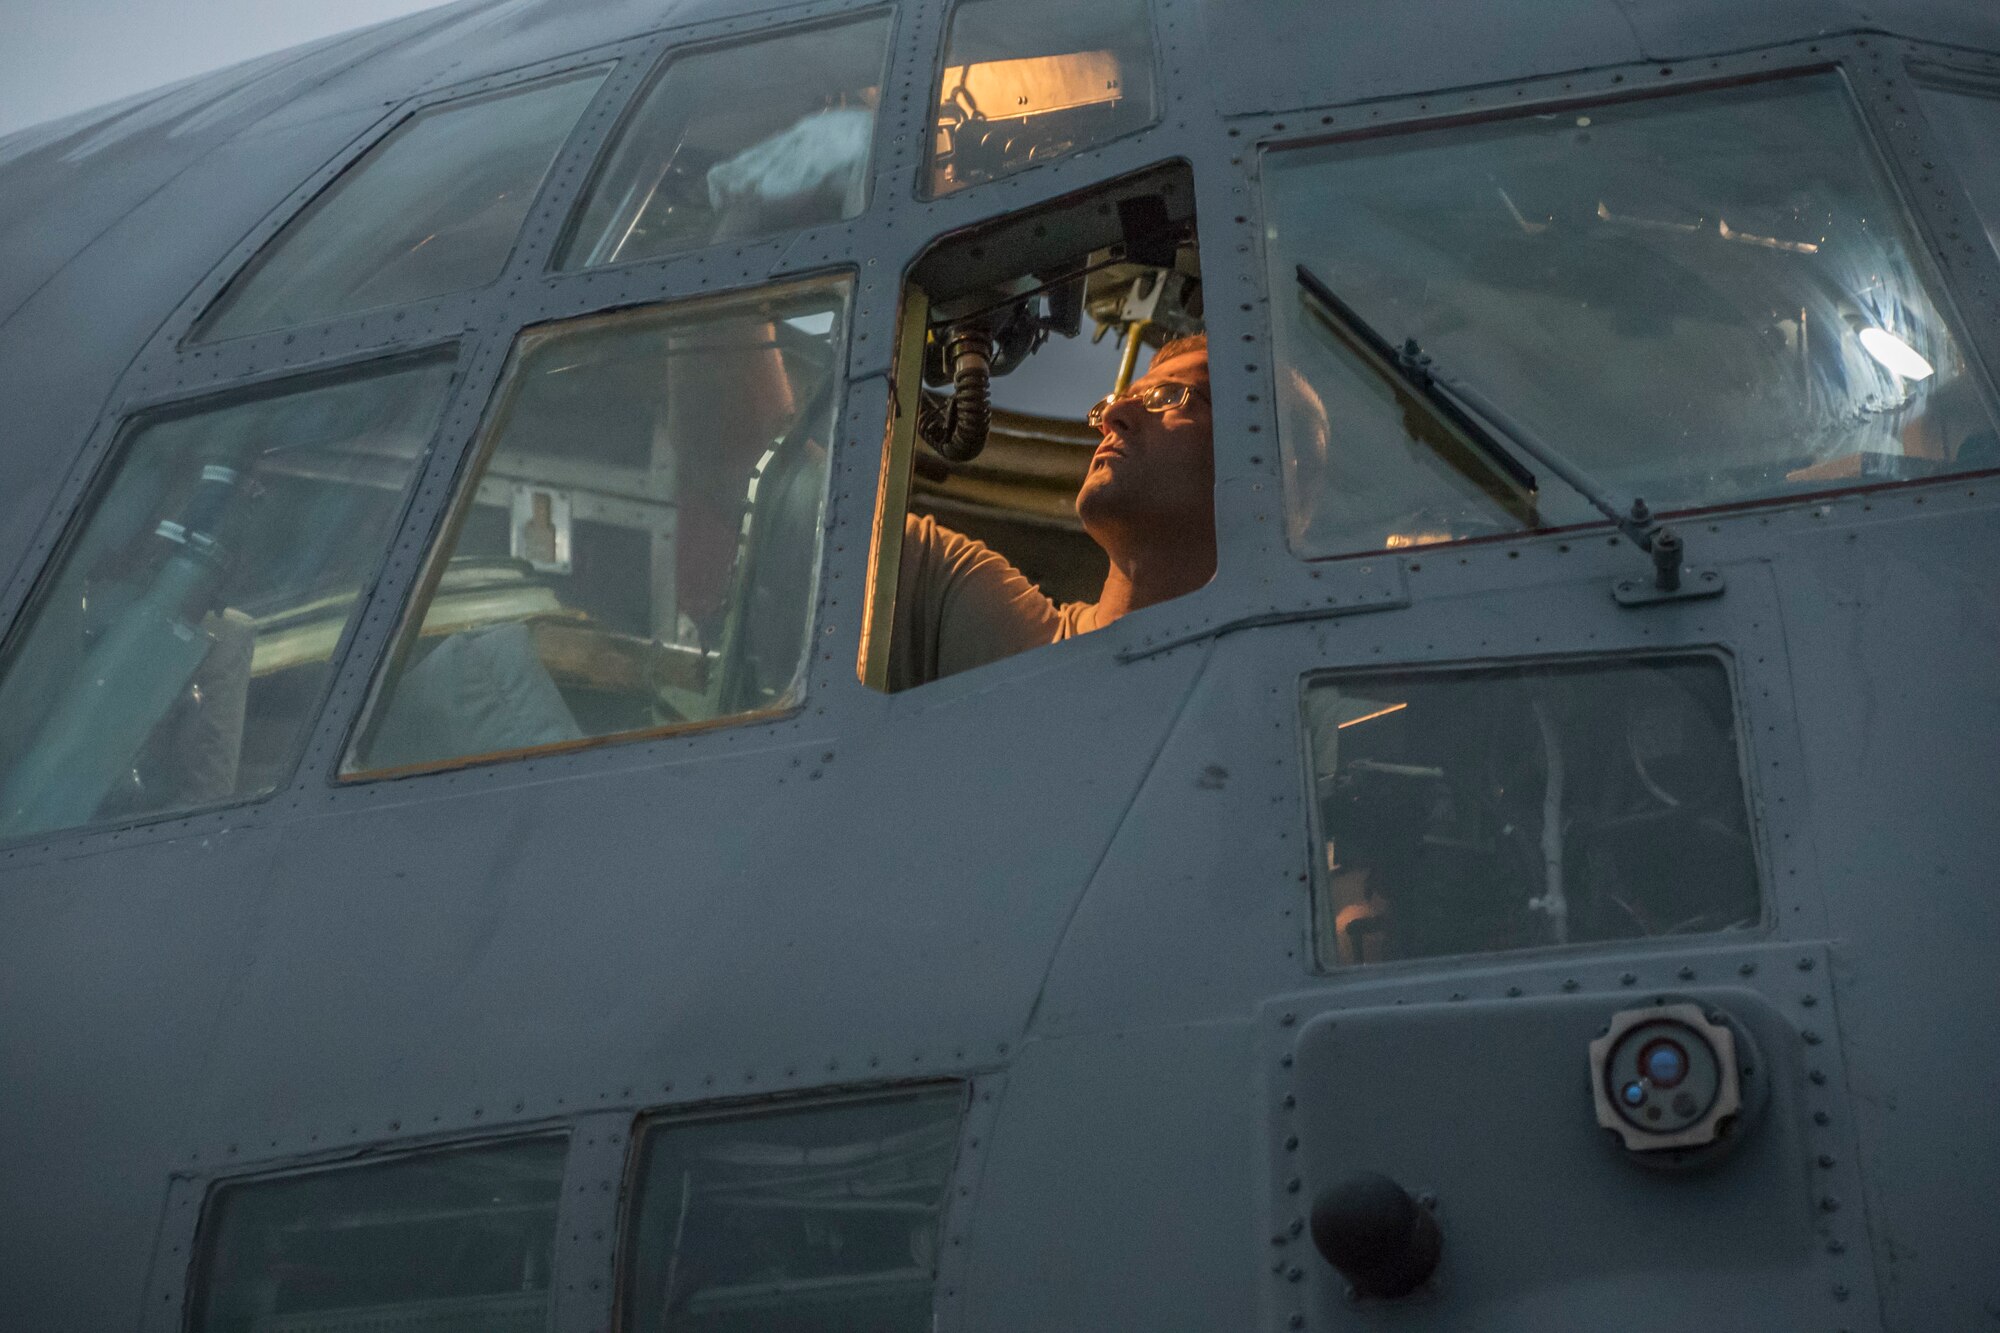 A photo of a military member through the C-130 windows